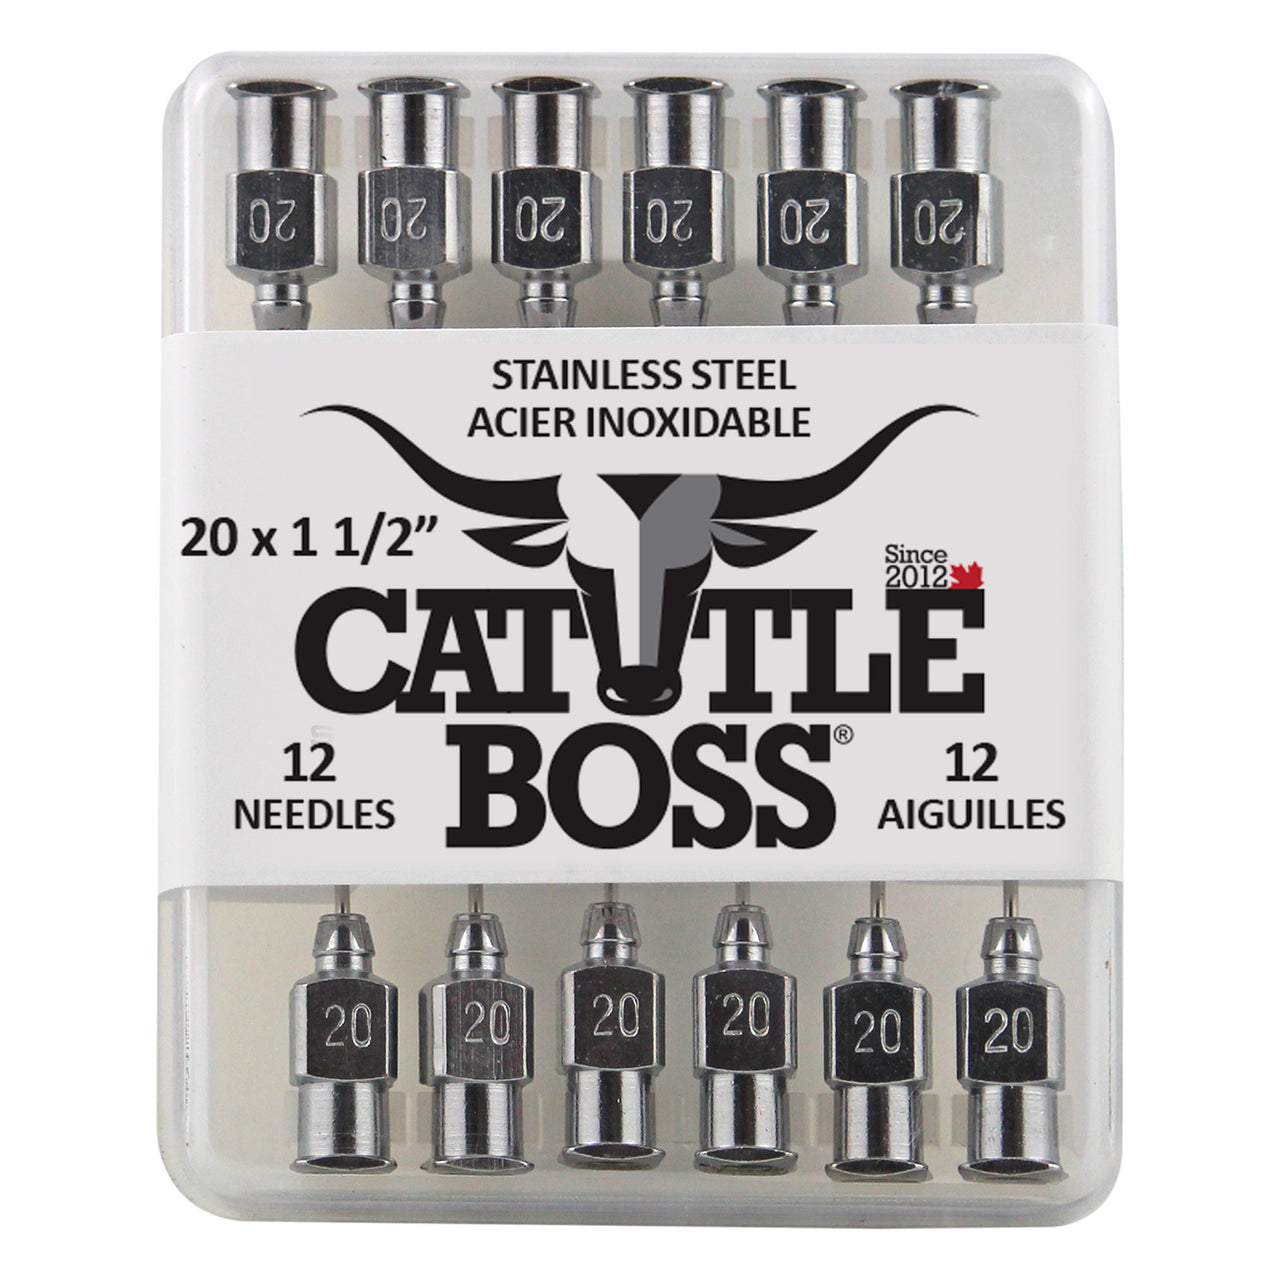 Cattle Boss Stainless Steel Hub Needle (12 Pack) 20X1 1/2 - Drug Administration Cattle Boss - Canada